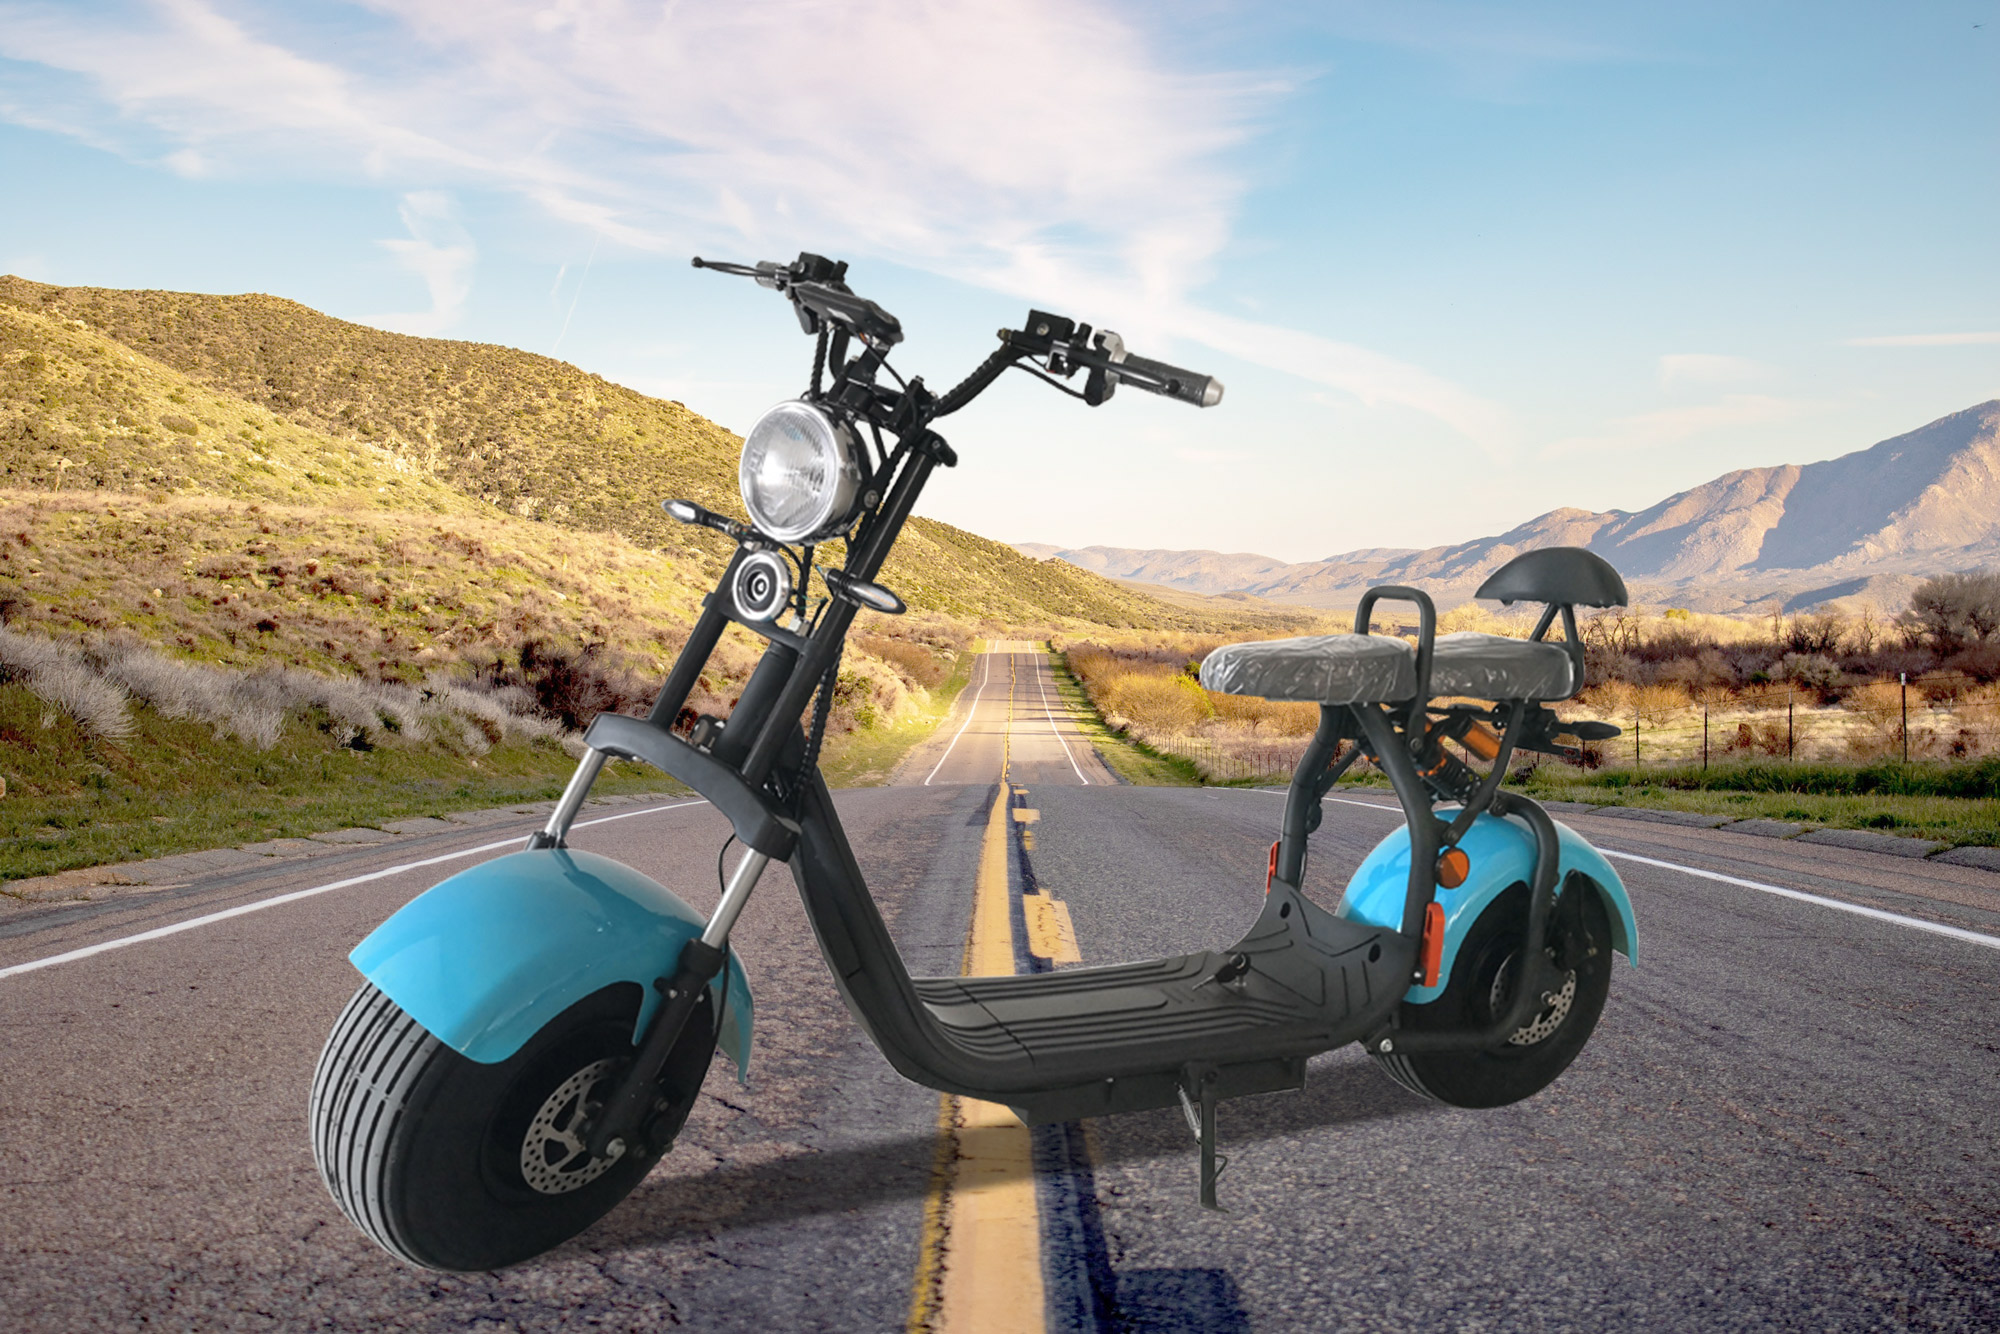 One container new EEC electric scooters will be shipped to Europe